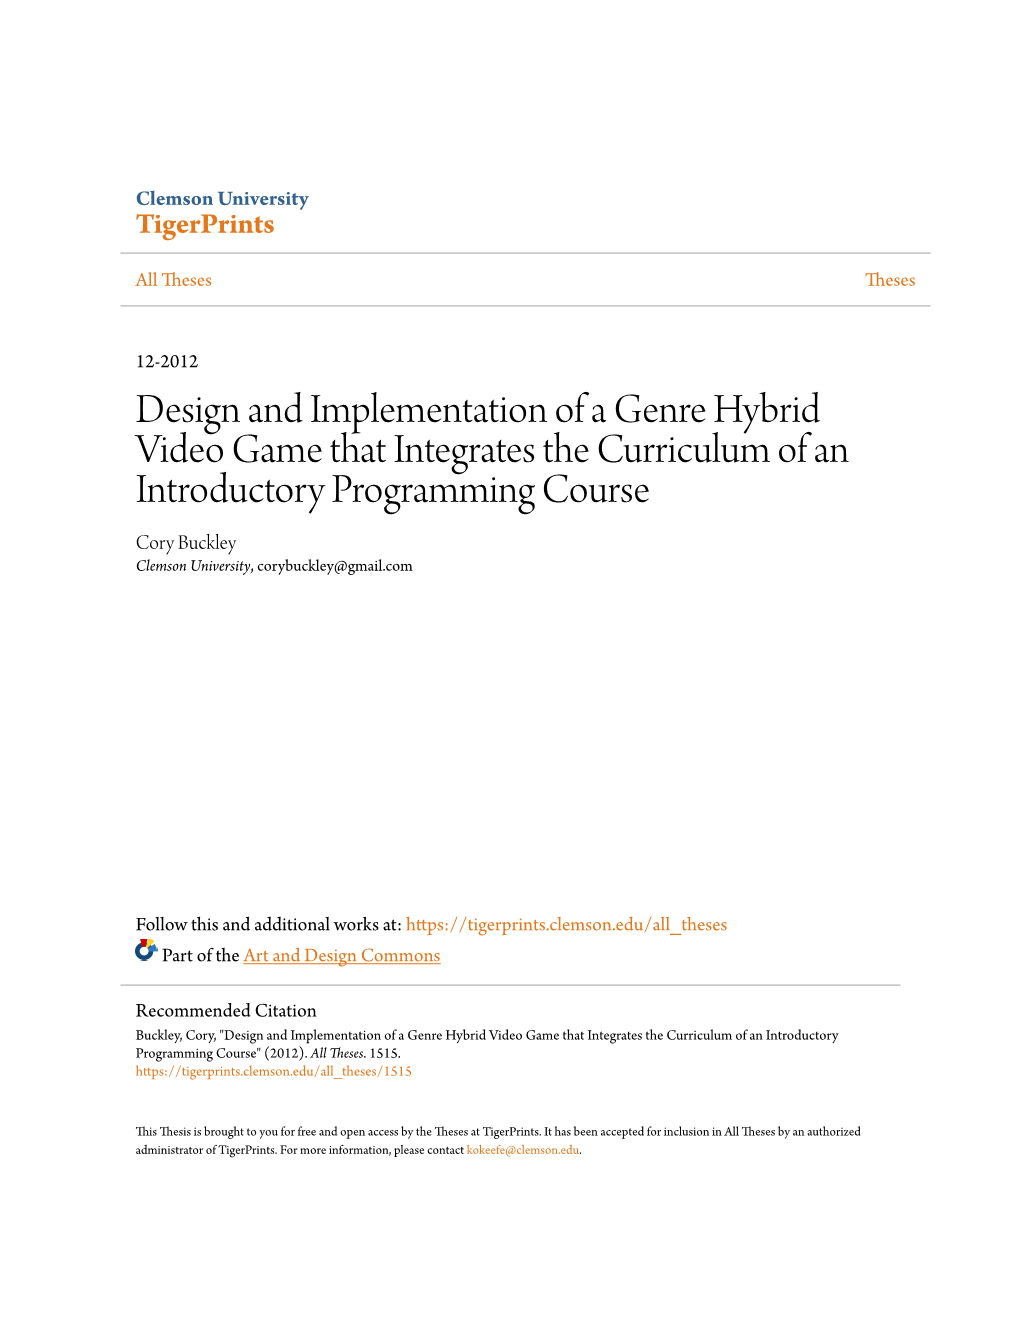 Design and Implementation of a Genre Hybrid Video Game That